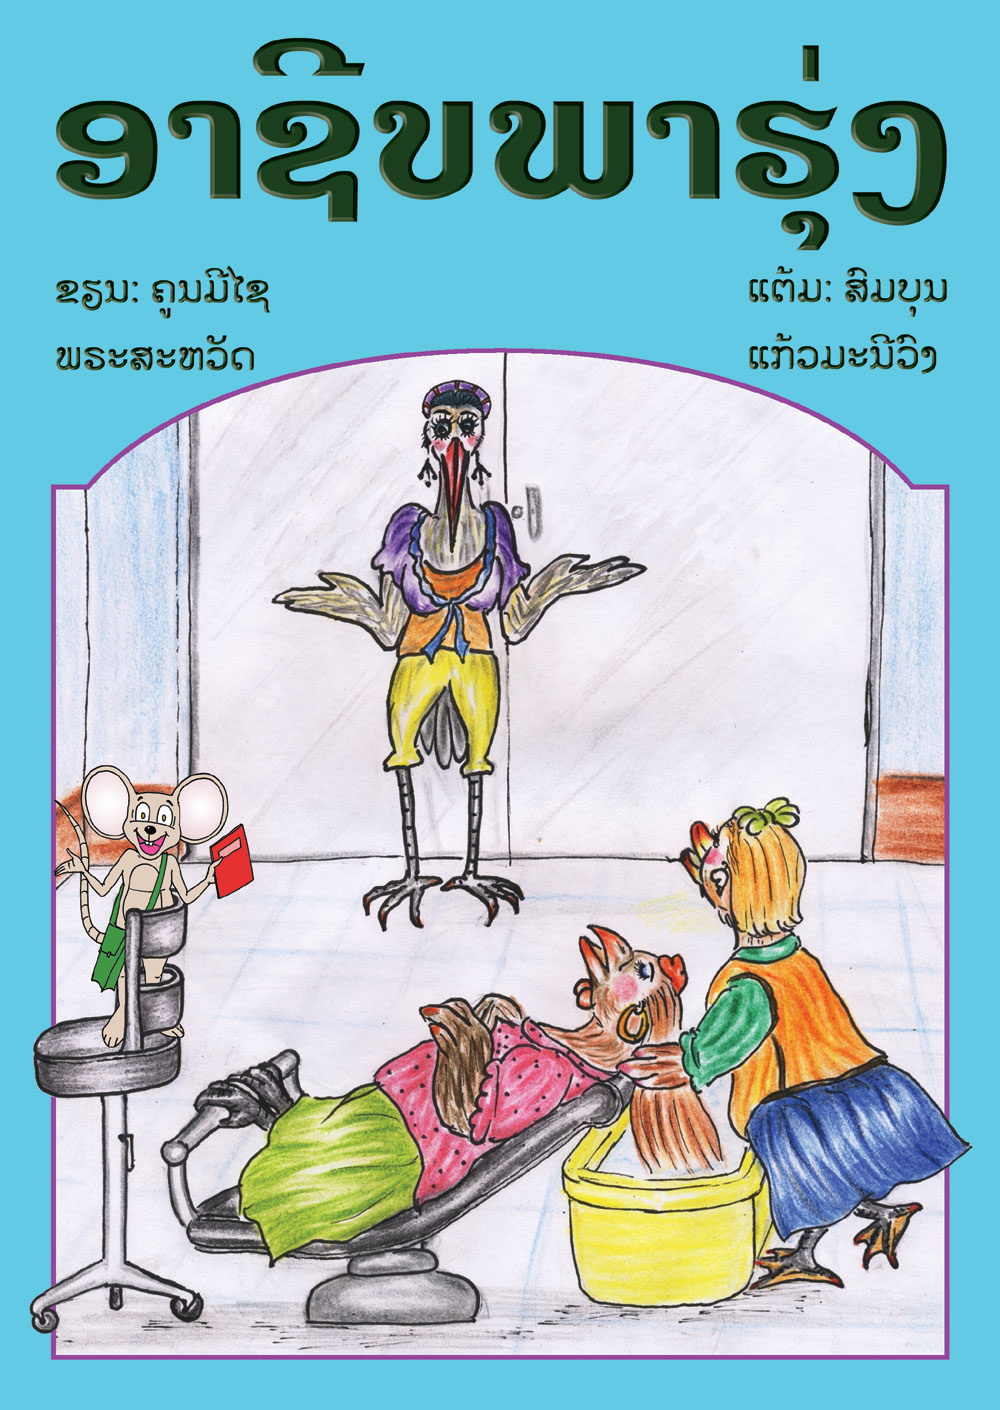 Who Are You? large book cover, published in Lao language